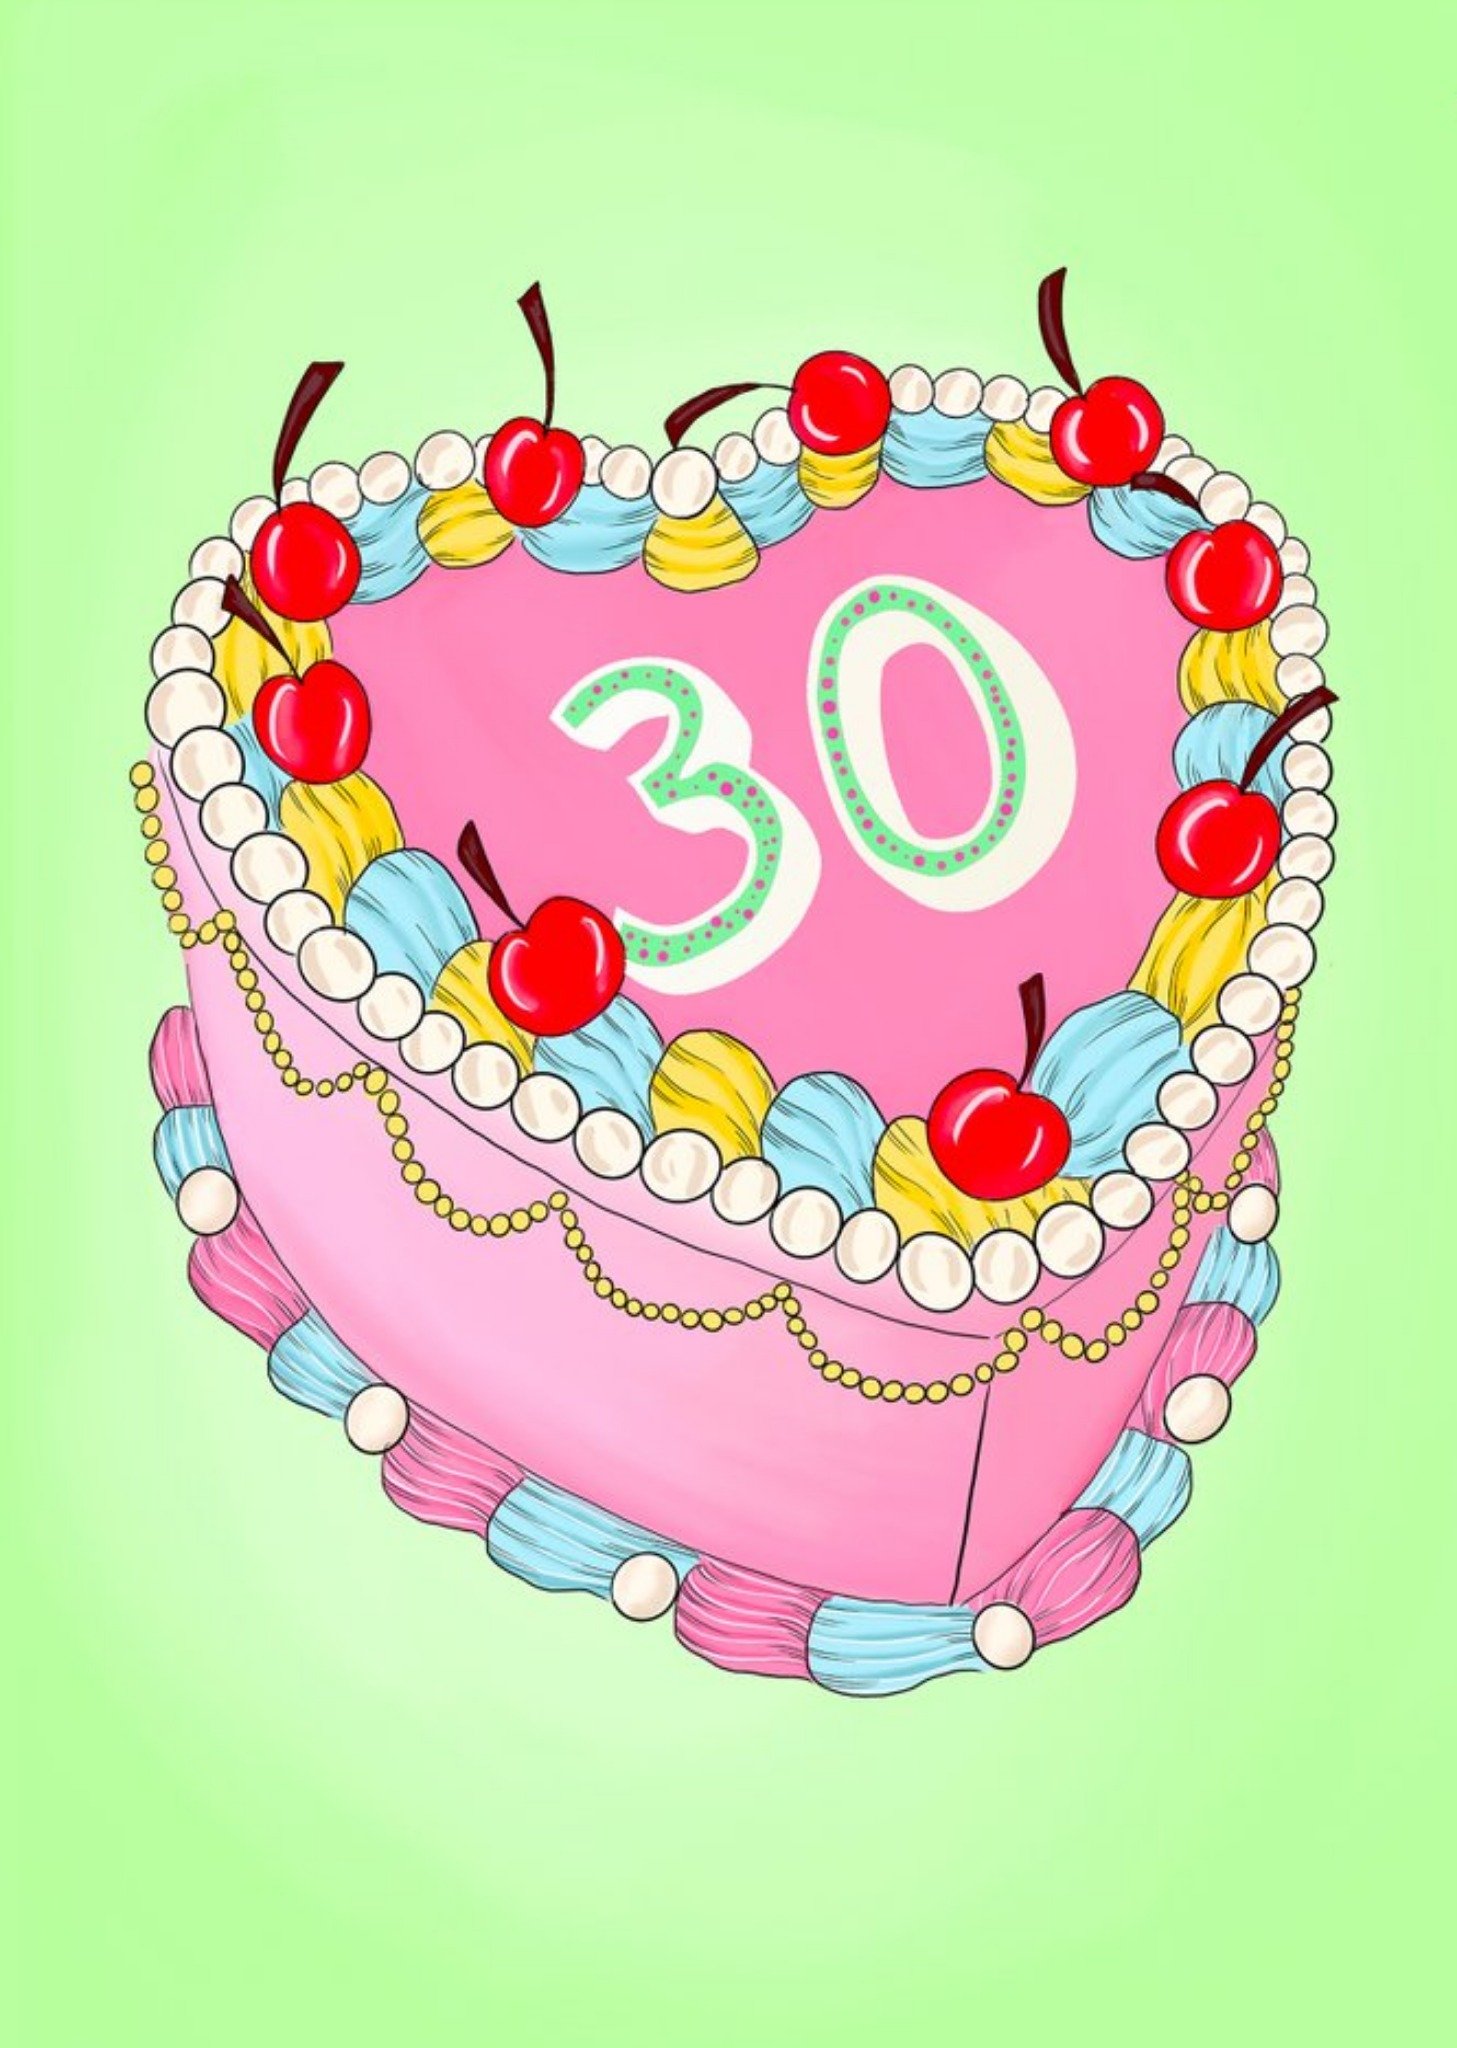 Moonpig Poppy And Mabel Bright Graphic Illustration Of A 30th Birthday Cake Card Ecard